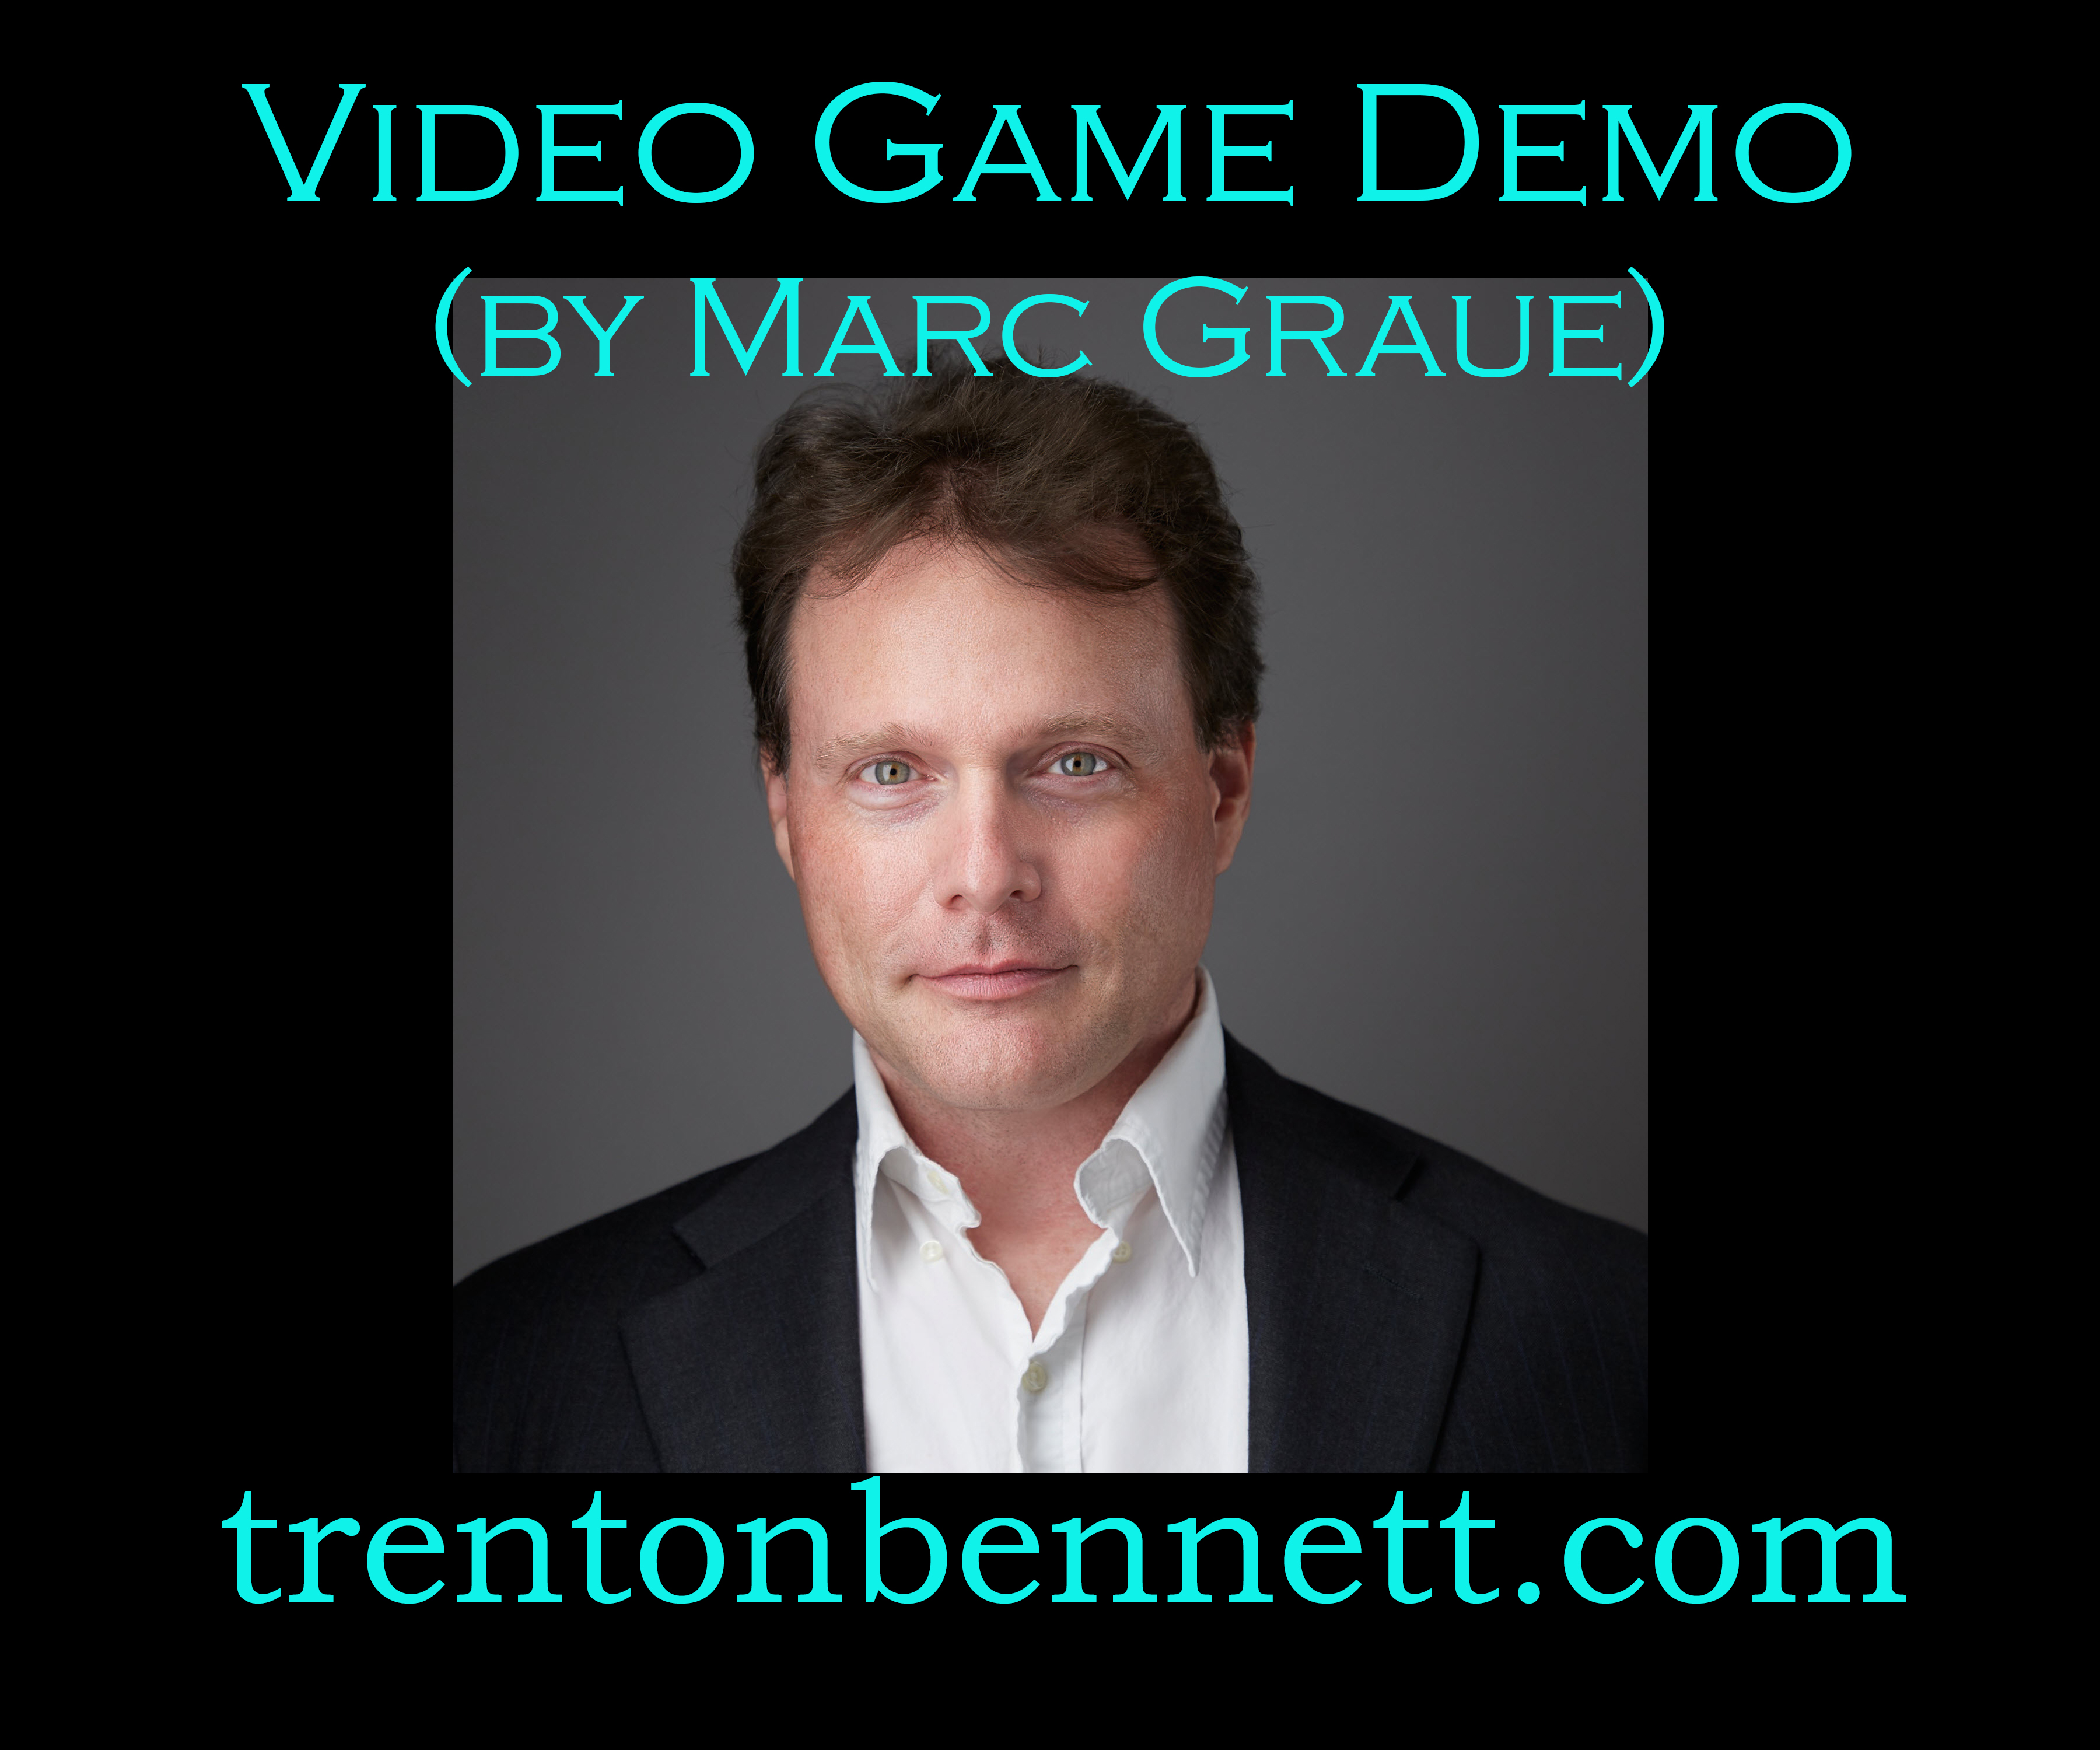 Video Game Demo (YouTube) by Marc Graue